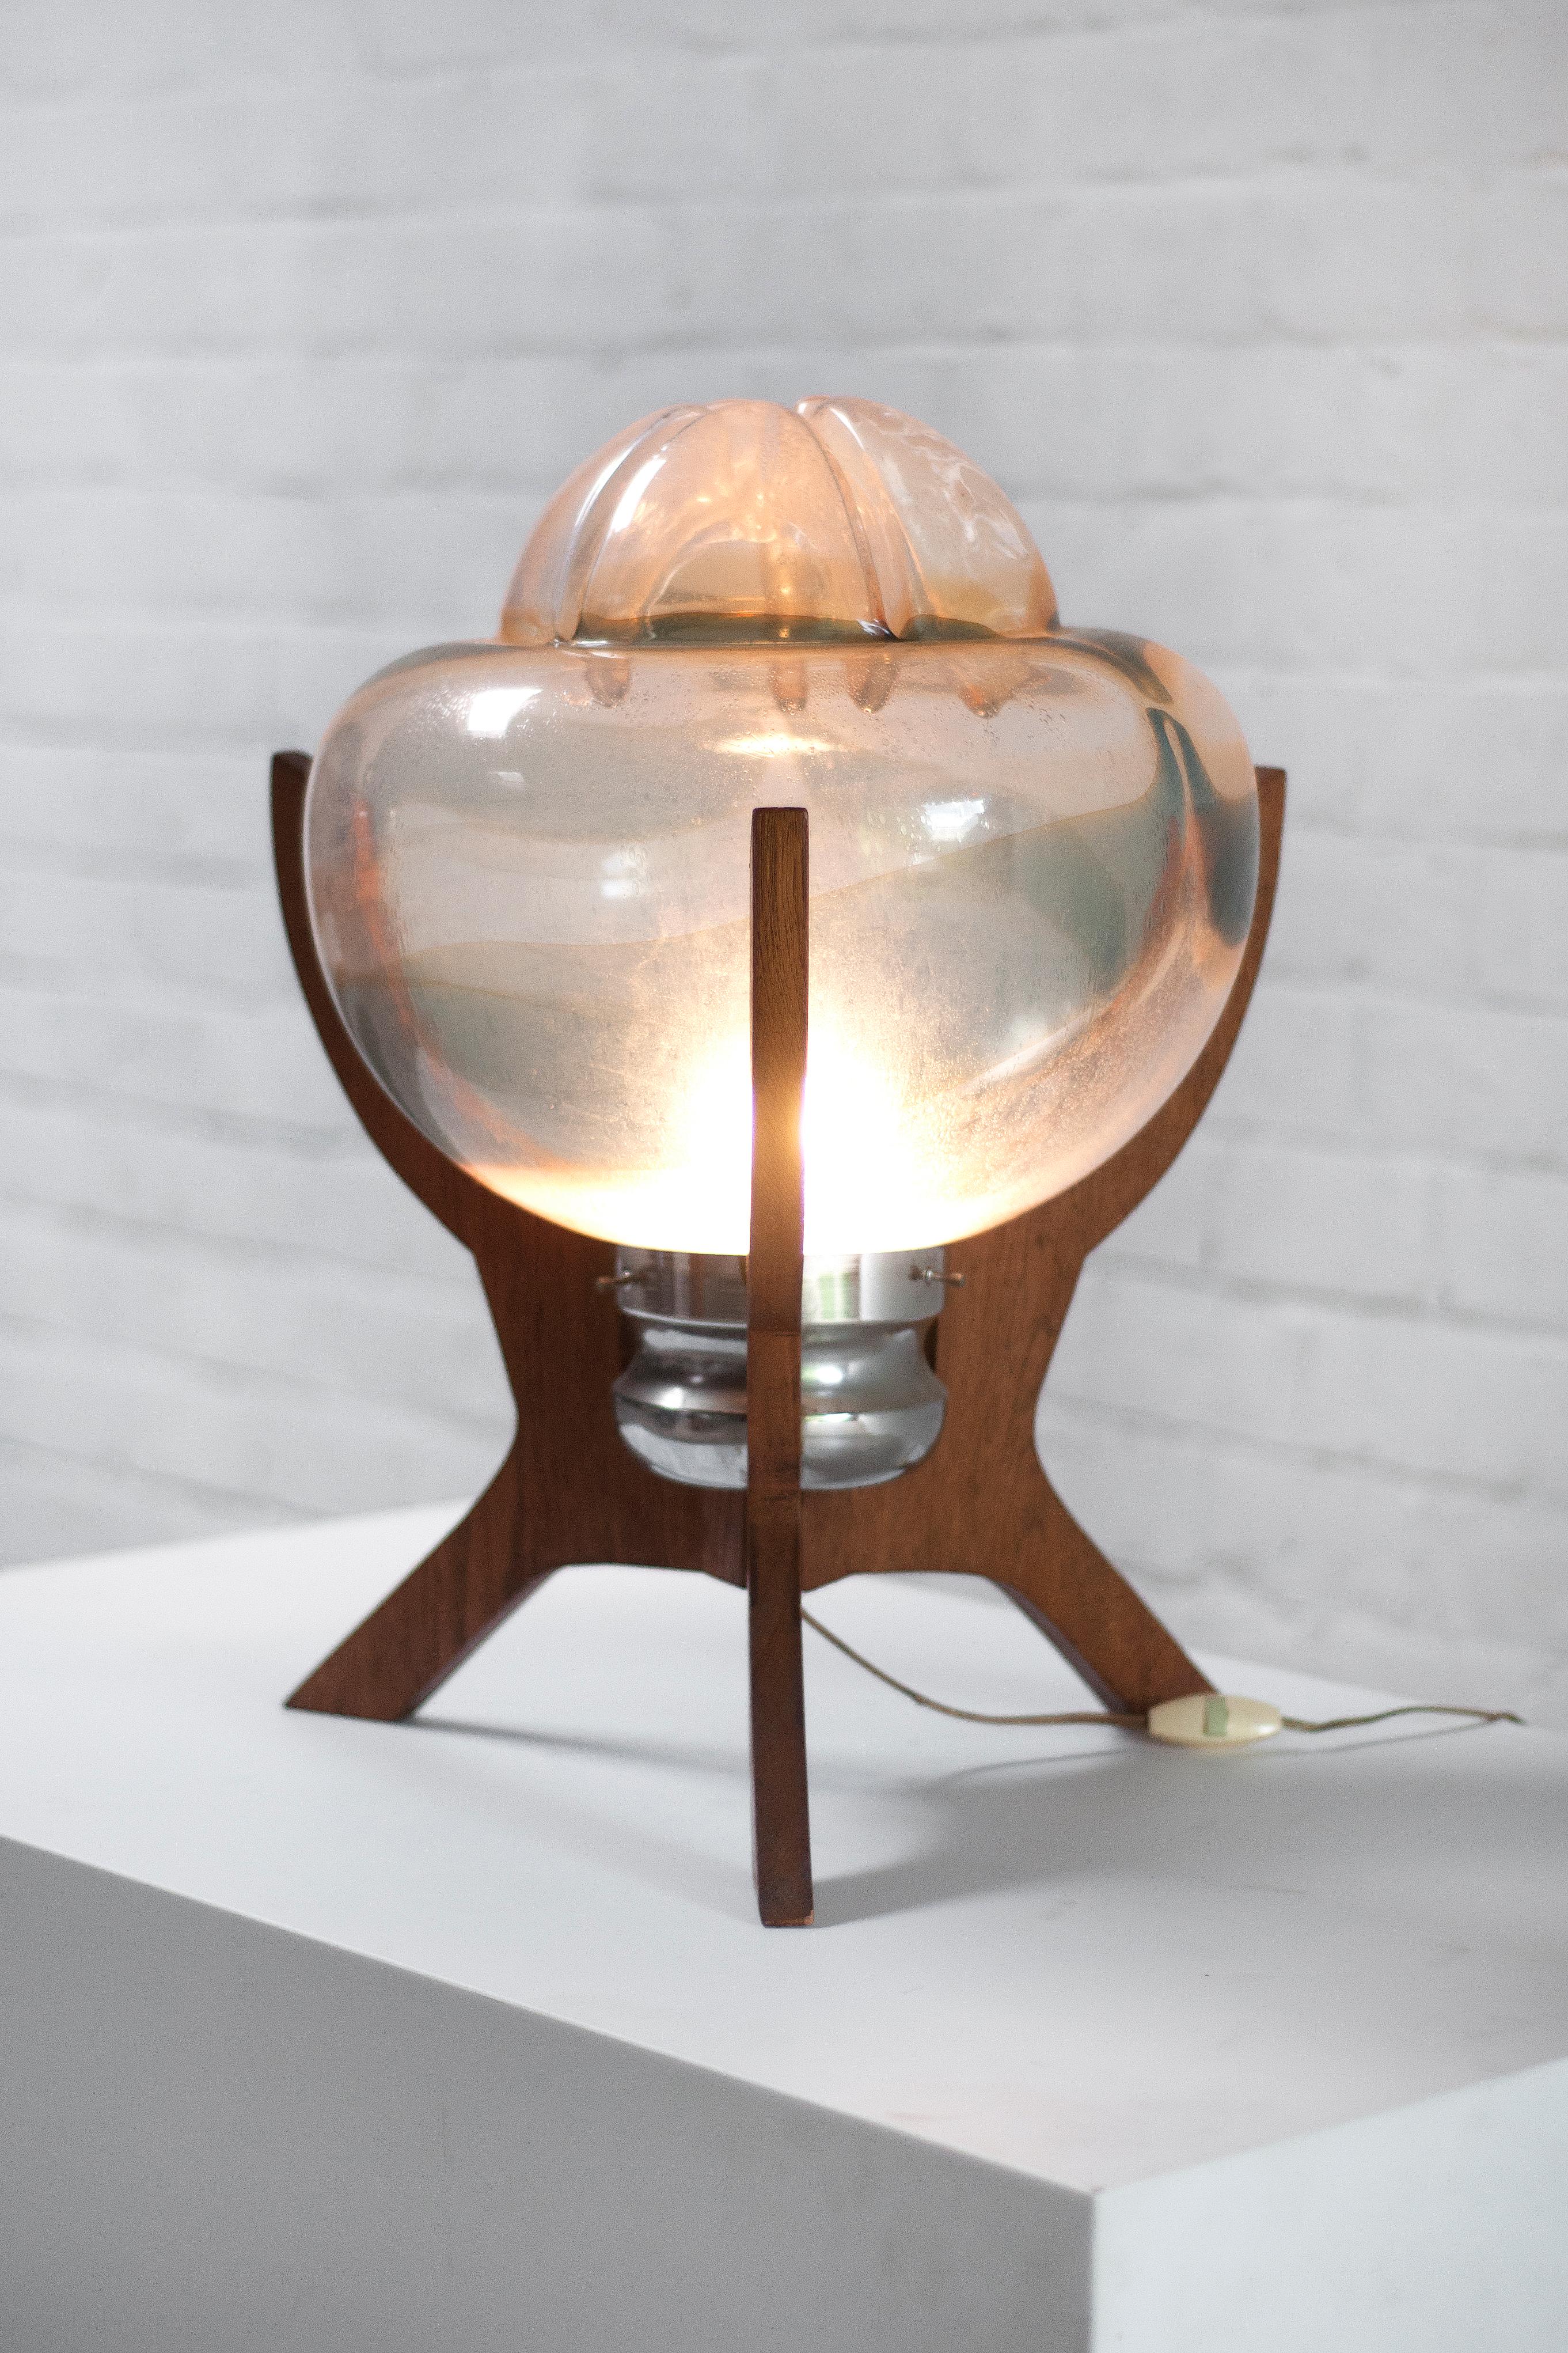 A very peculiar and never before seen table lamp made out of a large murano glass shade with a sculptural wooden base. Possibly italian but the origin is unsure. A very decorative piece that would without a doubt be the centre of attention in any